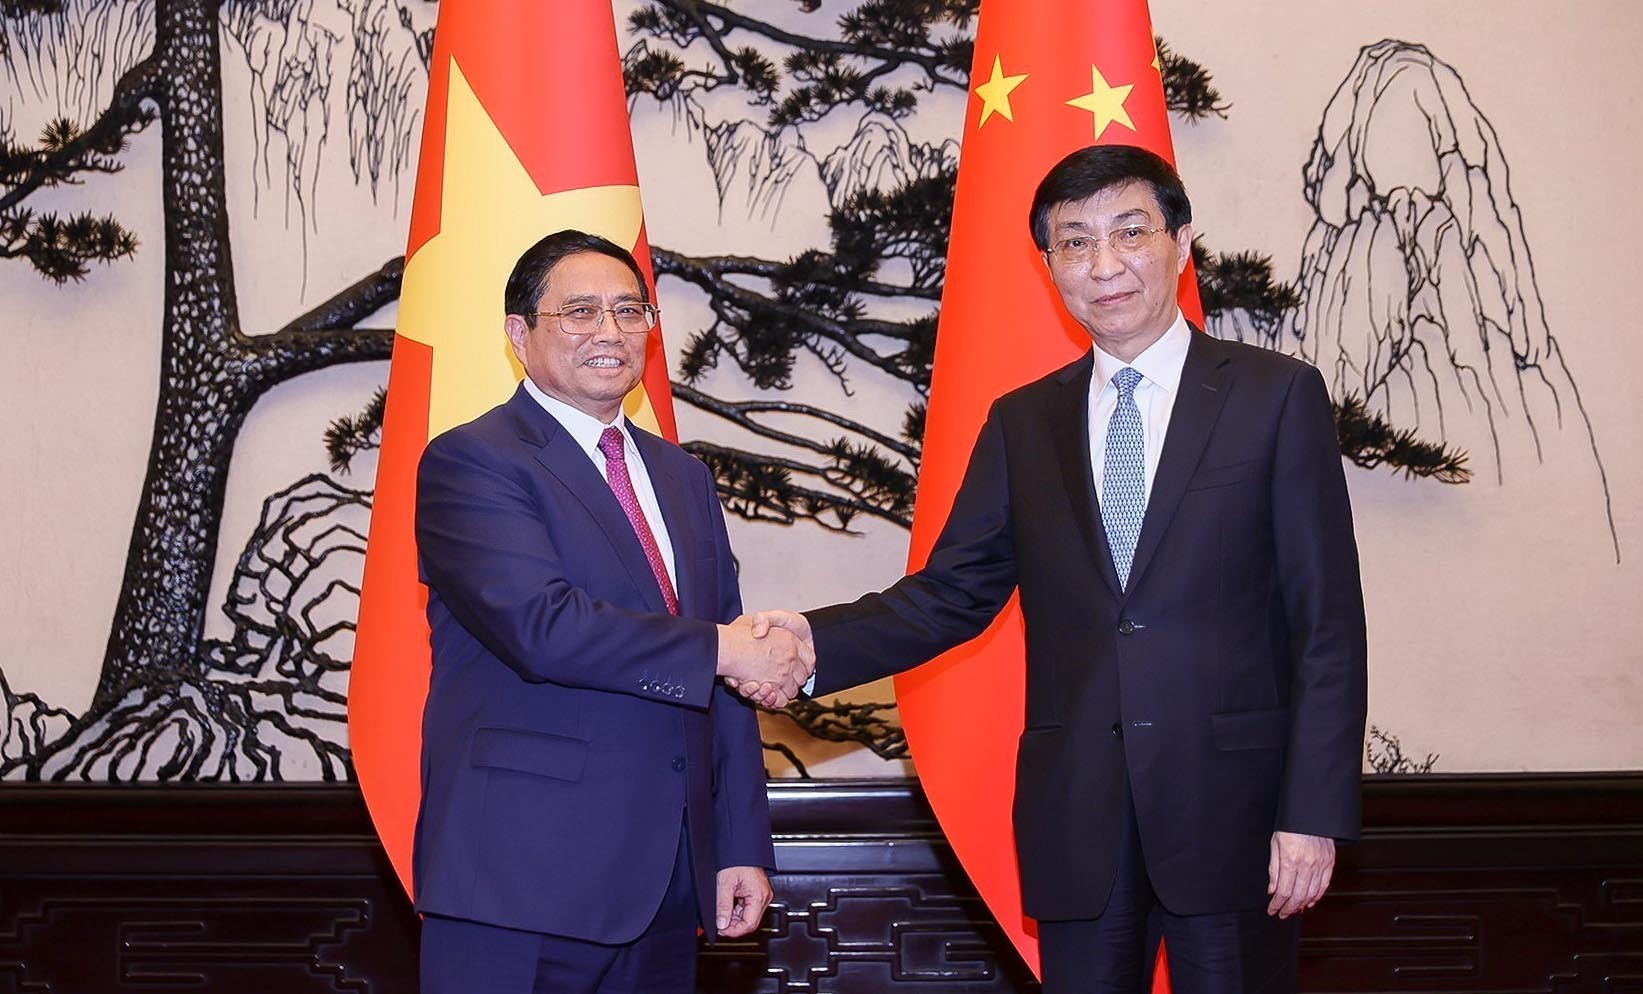 Prime Minister meets Chairman of Chinese People's Political Consultative Conference